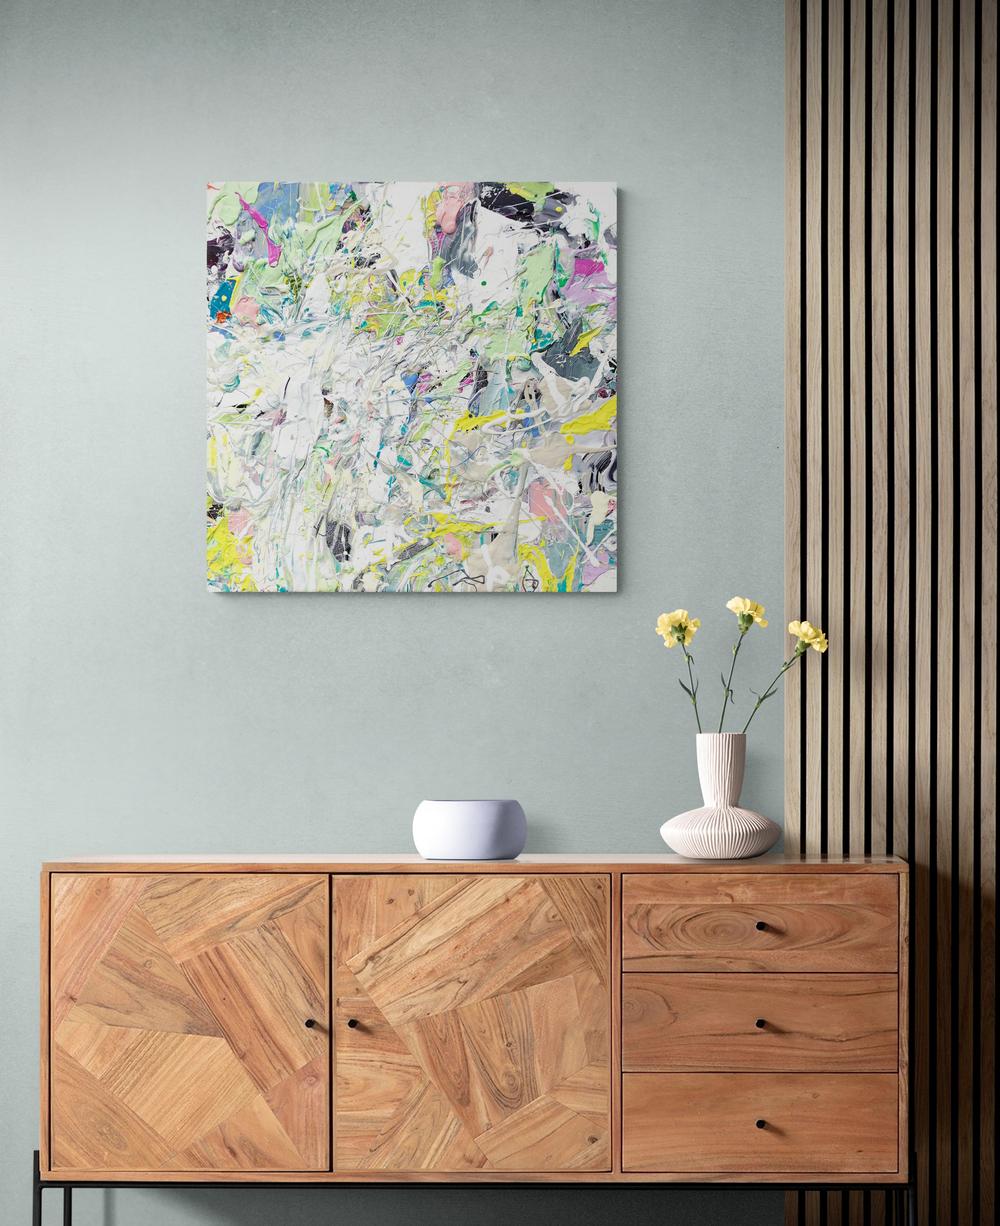 Rapid passages, drips and lines in pink, yellow, pastel green and dove gray are an extension of the artist's brush in this dynamic action painting by Adam Cohen. 

New York based artist Adam Cohen creates work alive with the gestural influences of